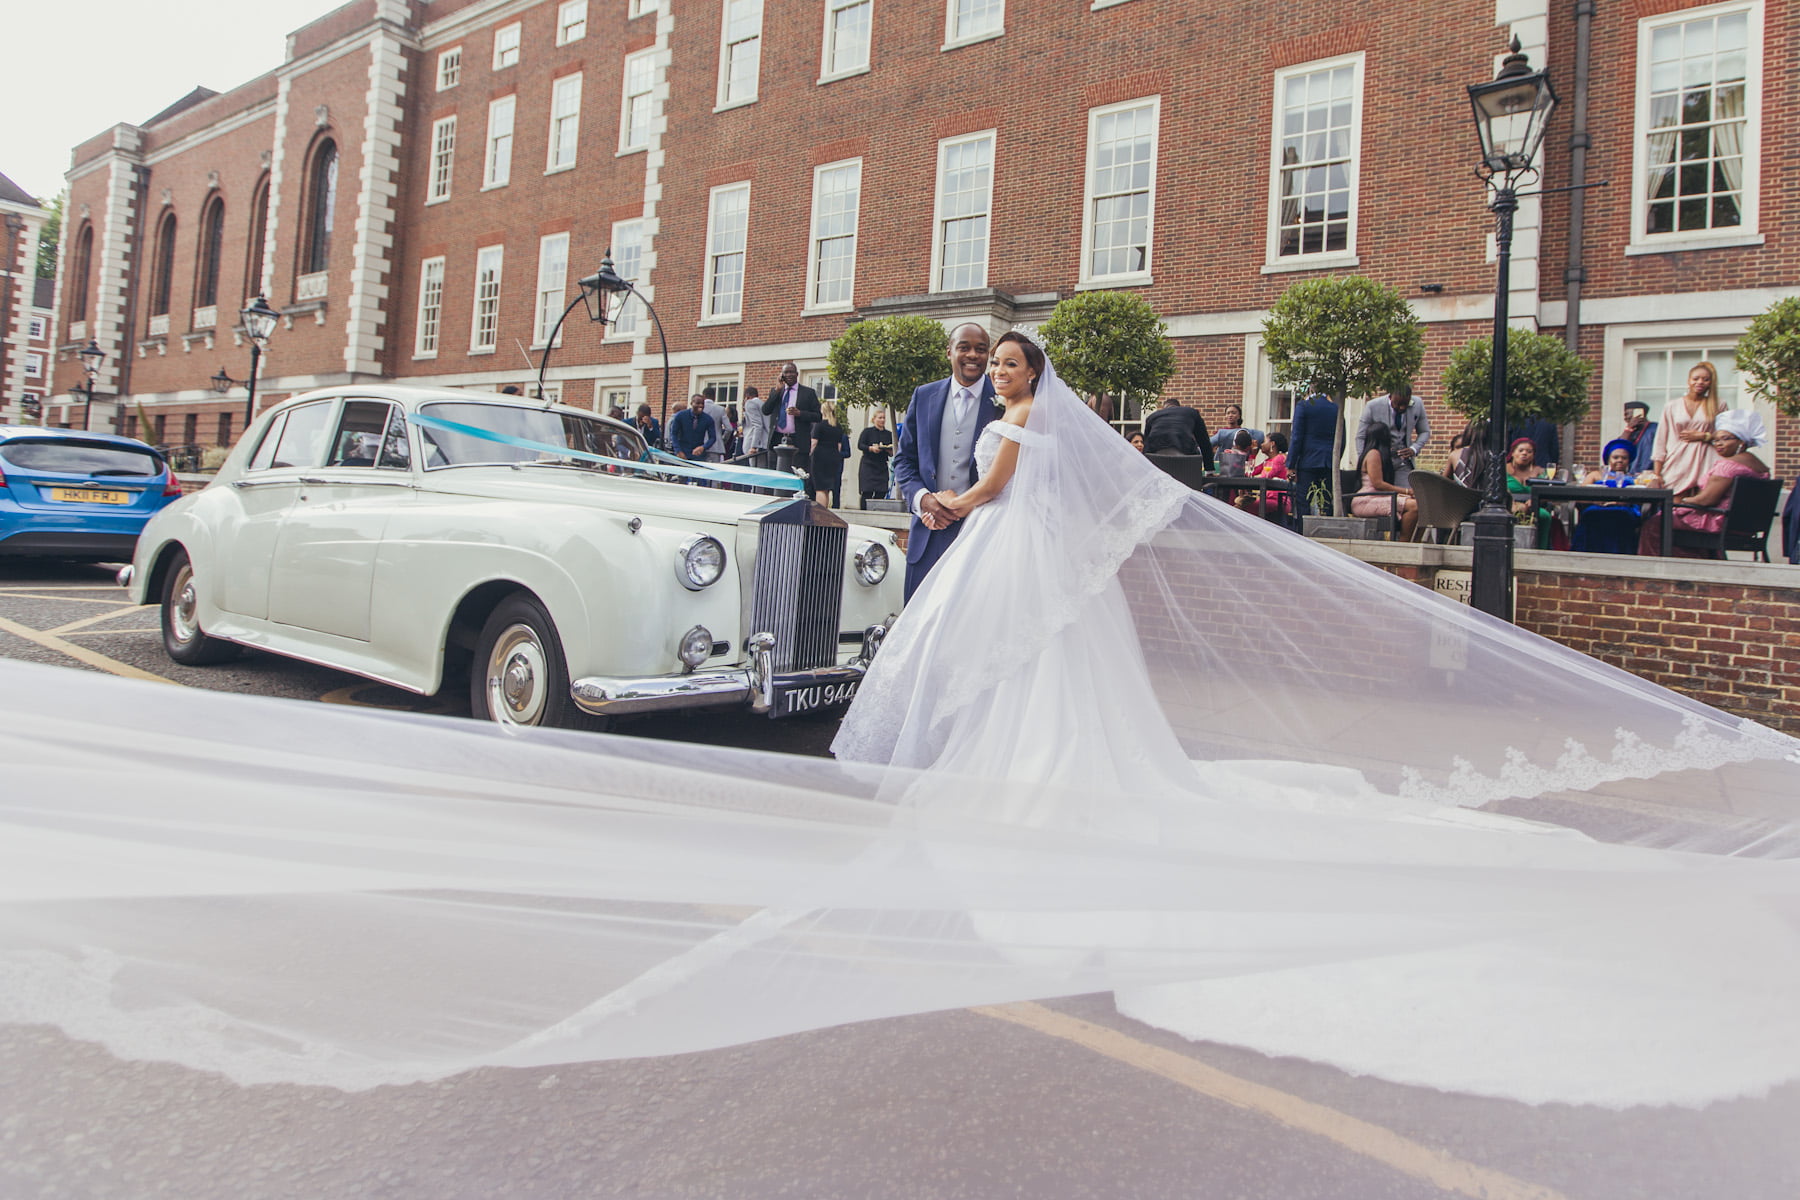 We have attended as photographer and videographer for a stylish British Nigerian couple's wedding day in Wood Green